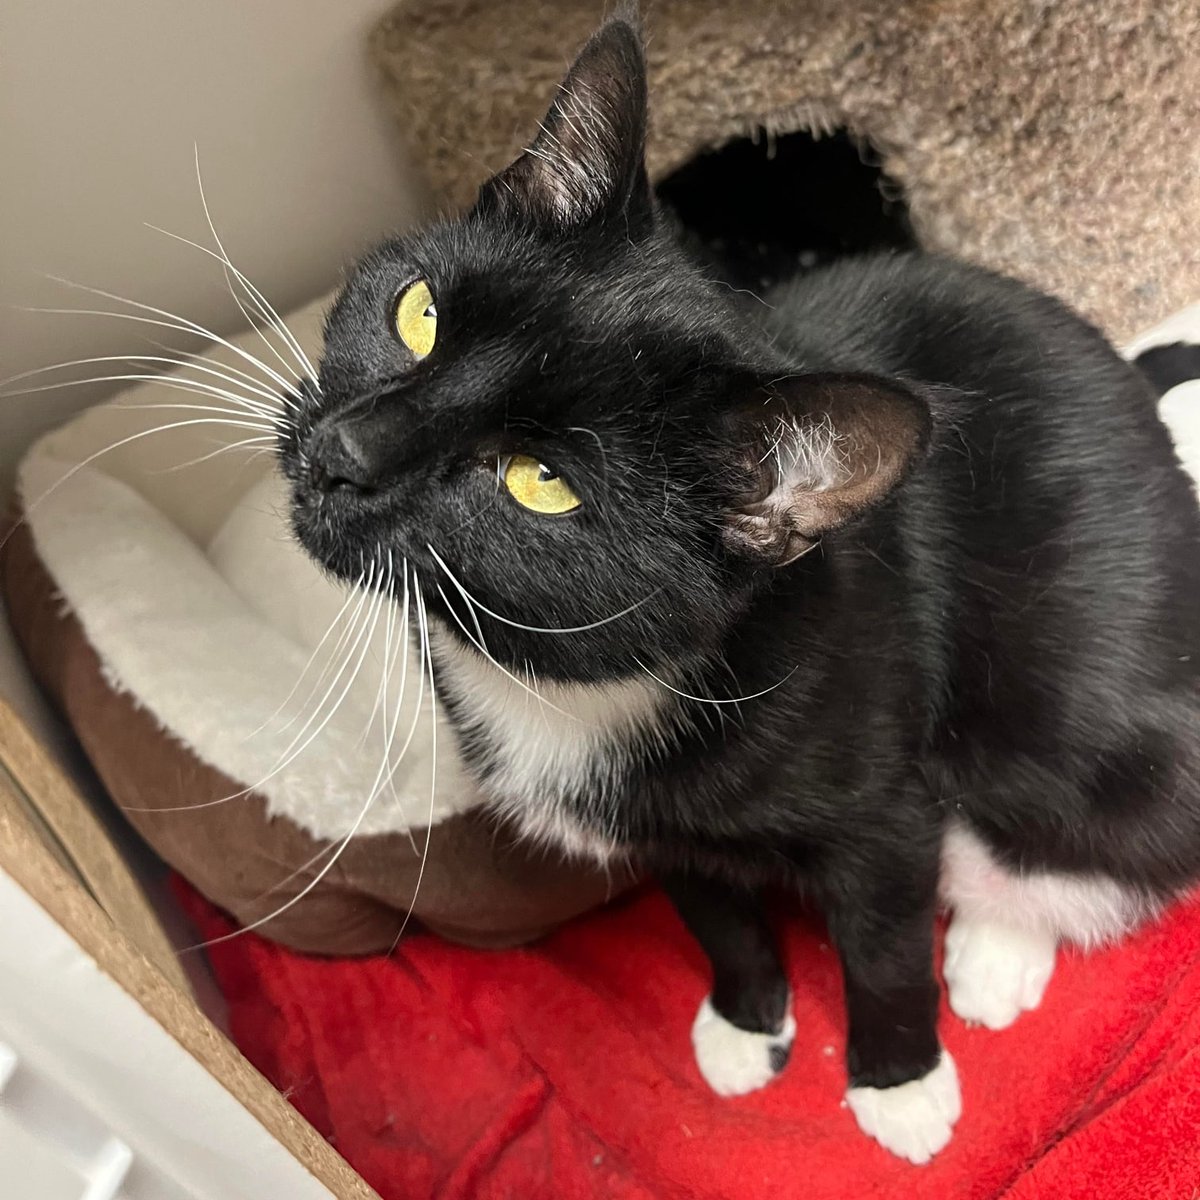 Pet purrsonal star Ramona here to tell you her adoption fee is only $75 until Thursday! 

#safeteamrescue #safeteamkitty #adoptdontshop #kittytwitter #edmontonadoptables #rescuecat #rescuedismyfavoritebreed #yegcats #catlovers